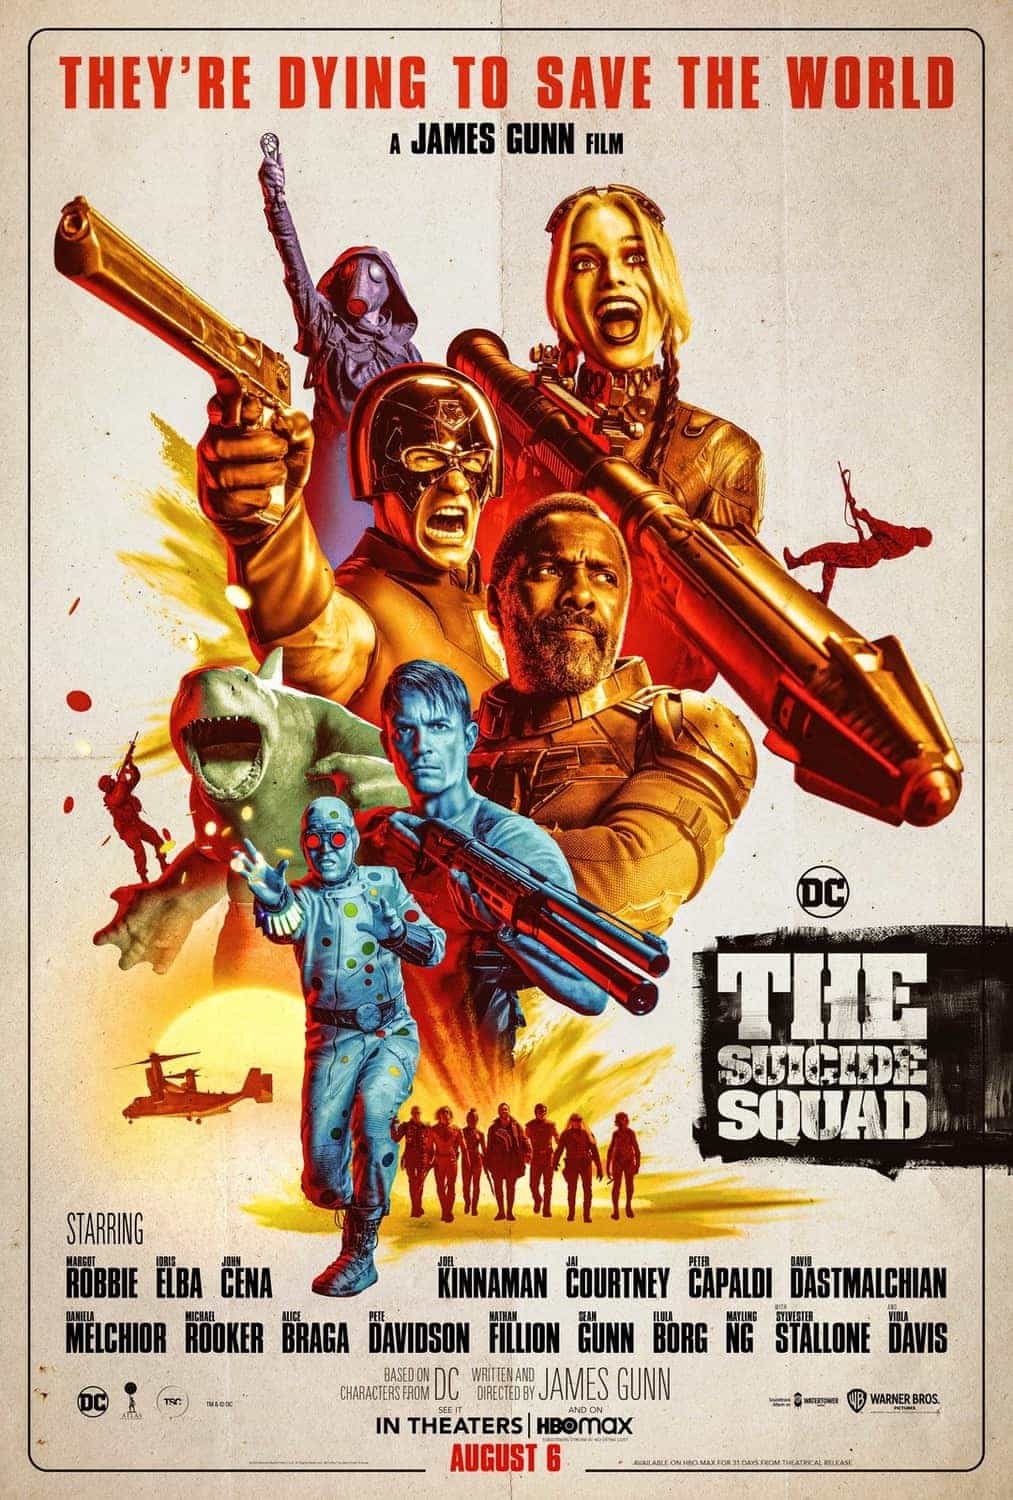 New red band trailer for the James Gunn take on The Suicide Squad